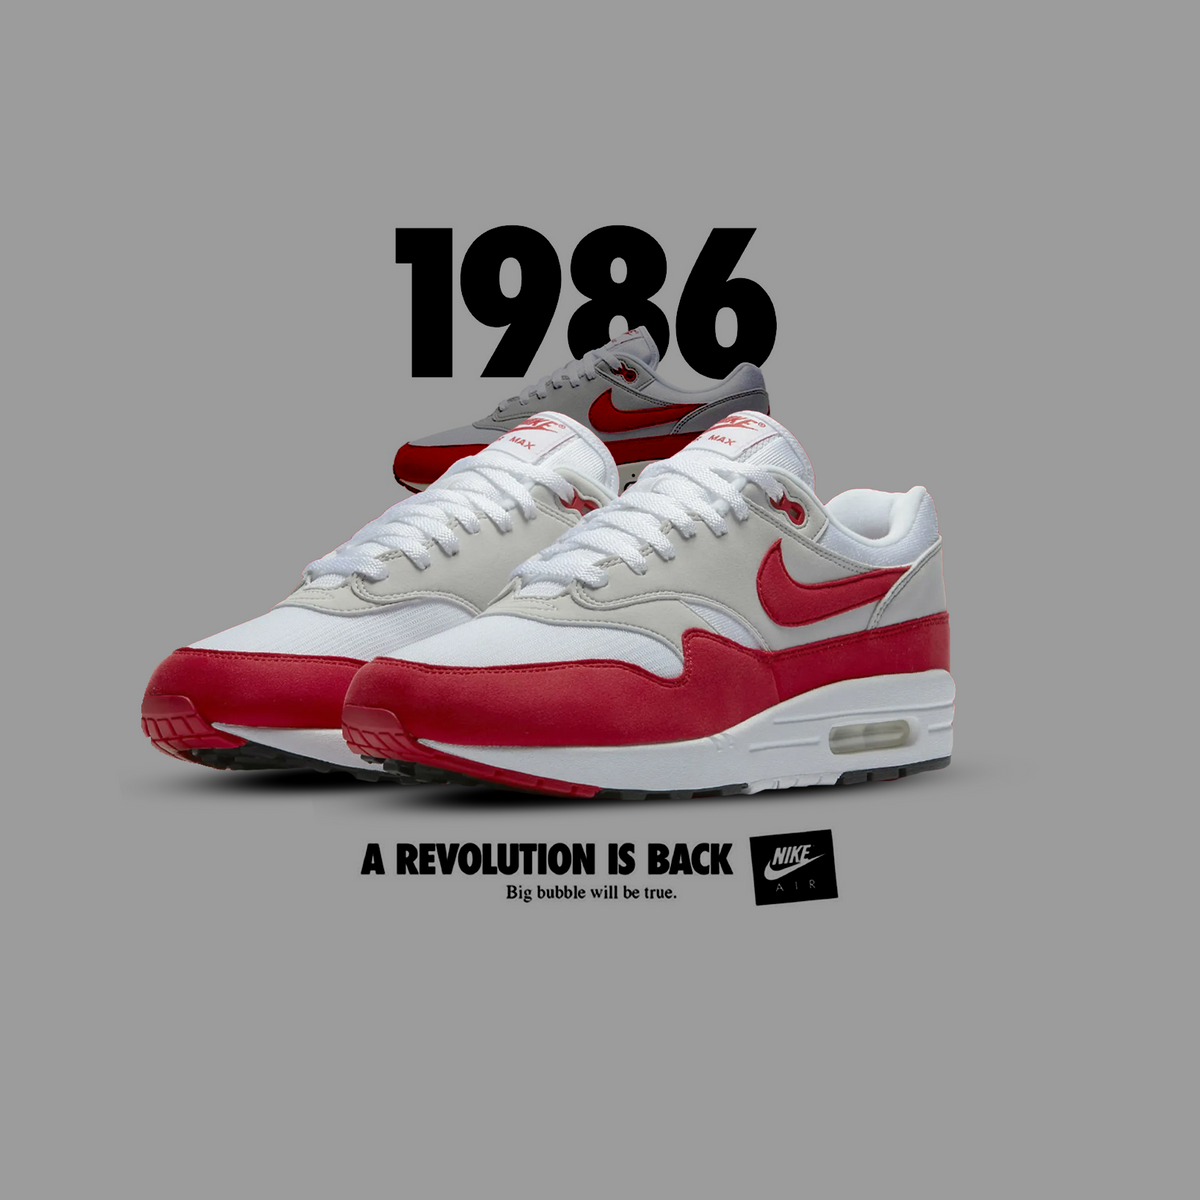 Nike to Bring Back the Air Max 1 ‘Big Bubble’